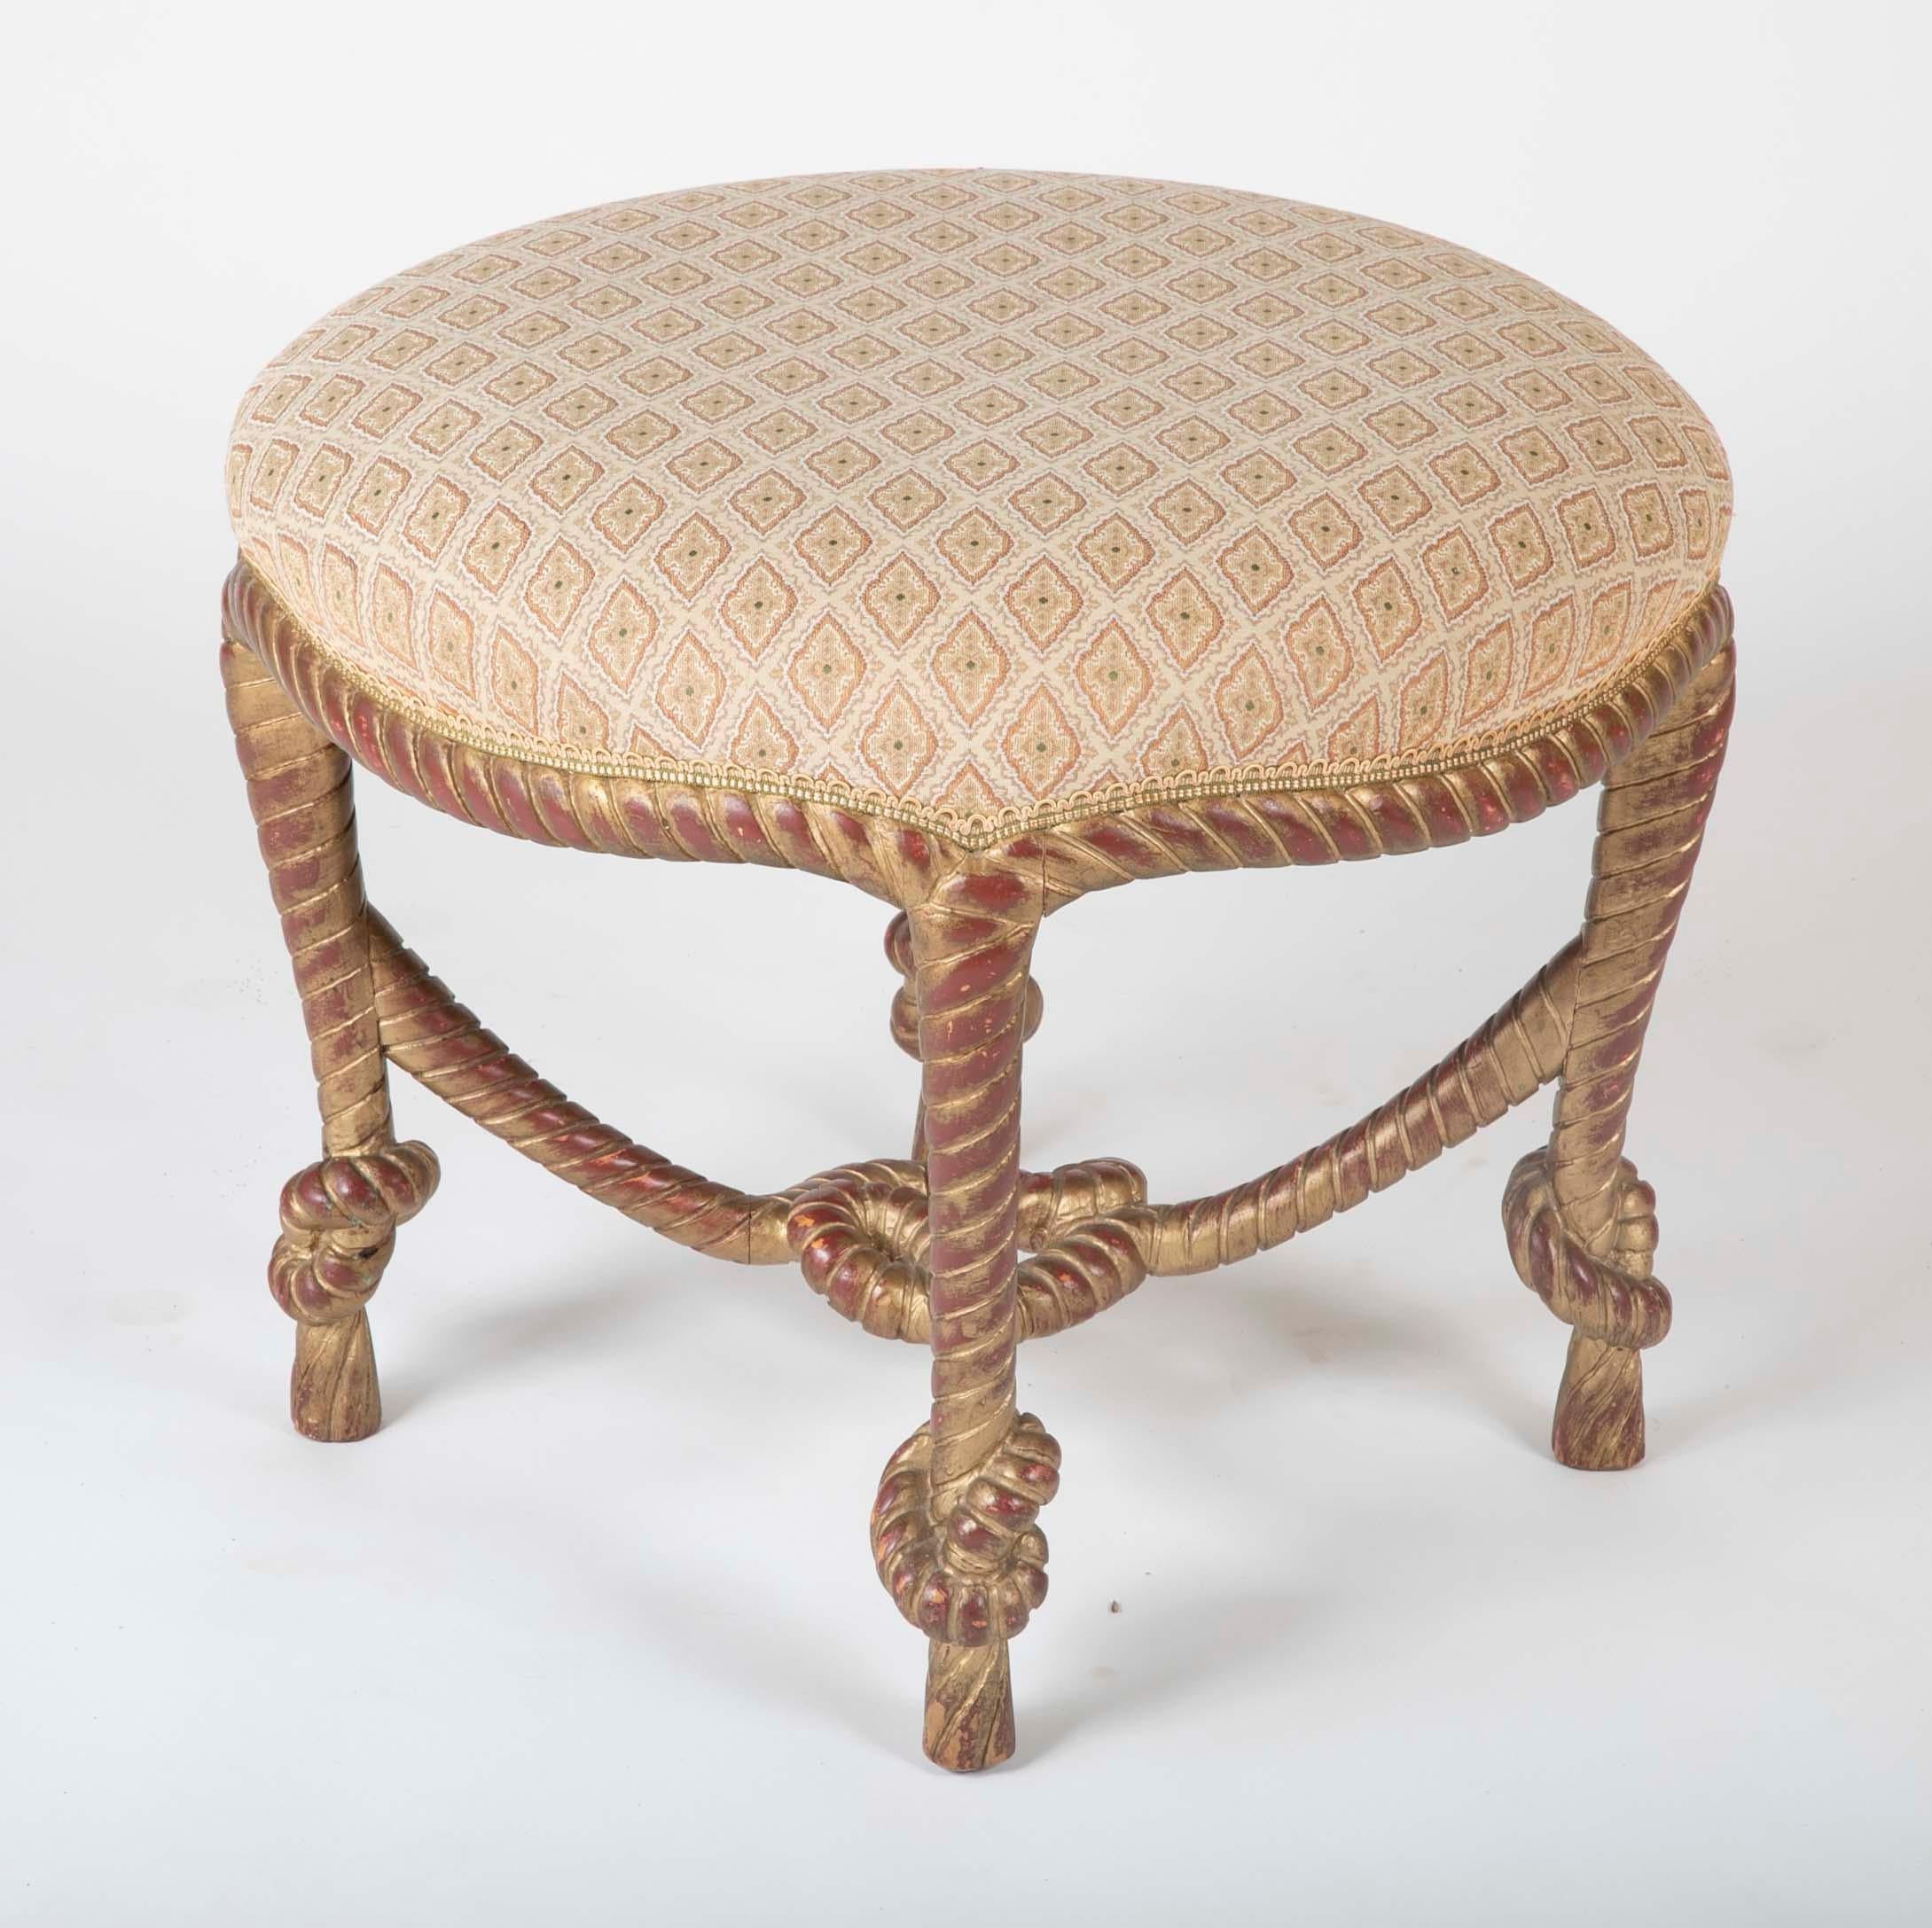 20th Century Italian Carved Giltwood Rope and Tassel Stool